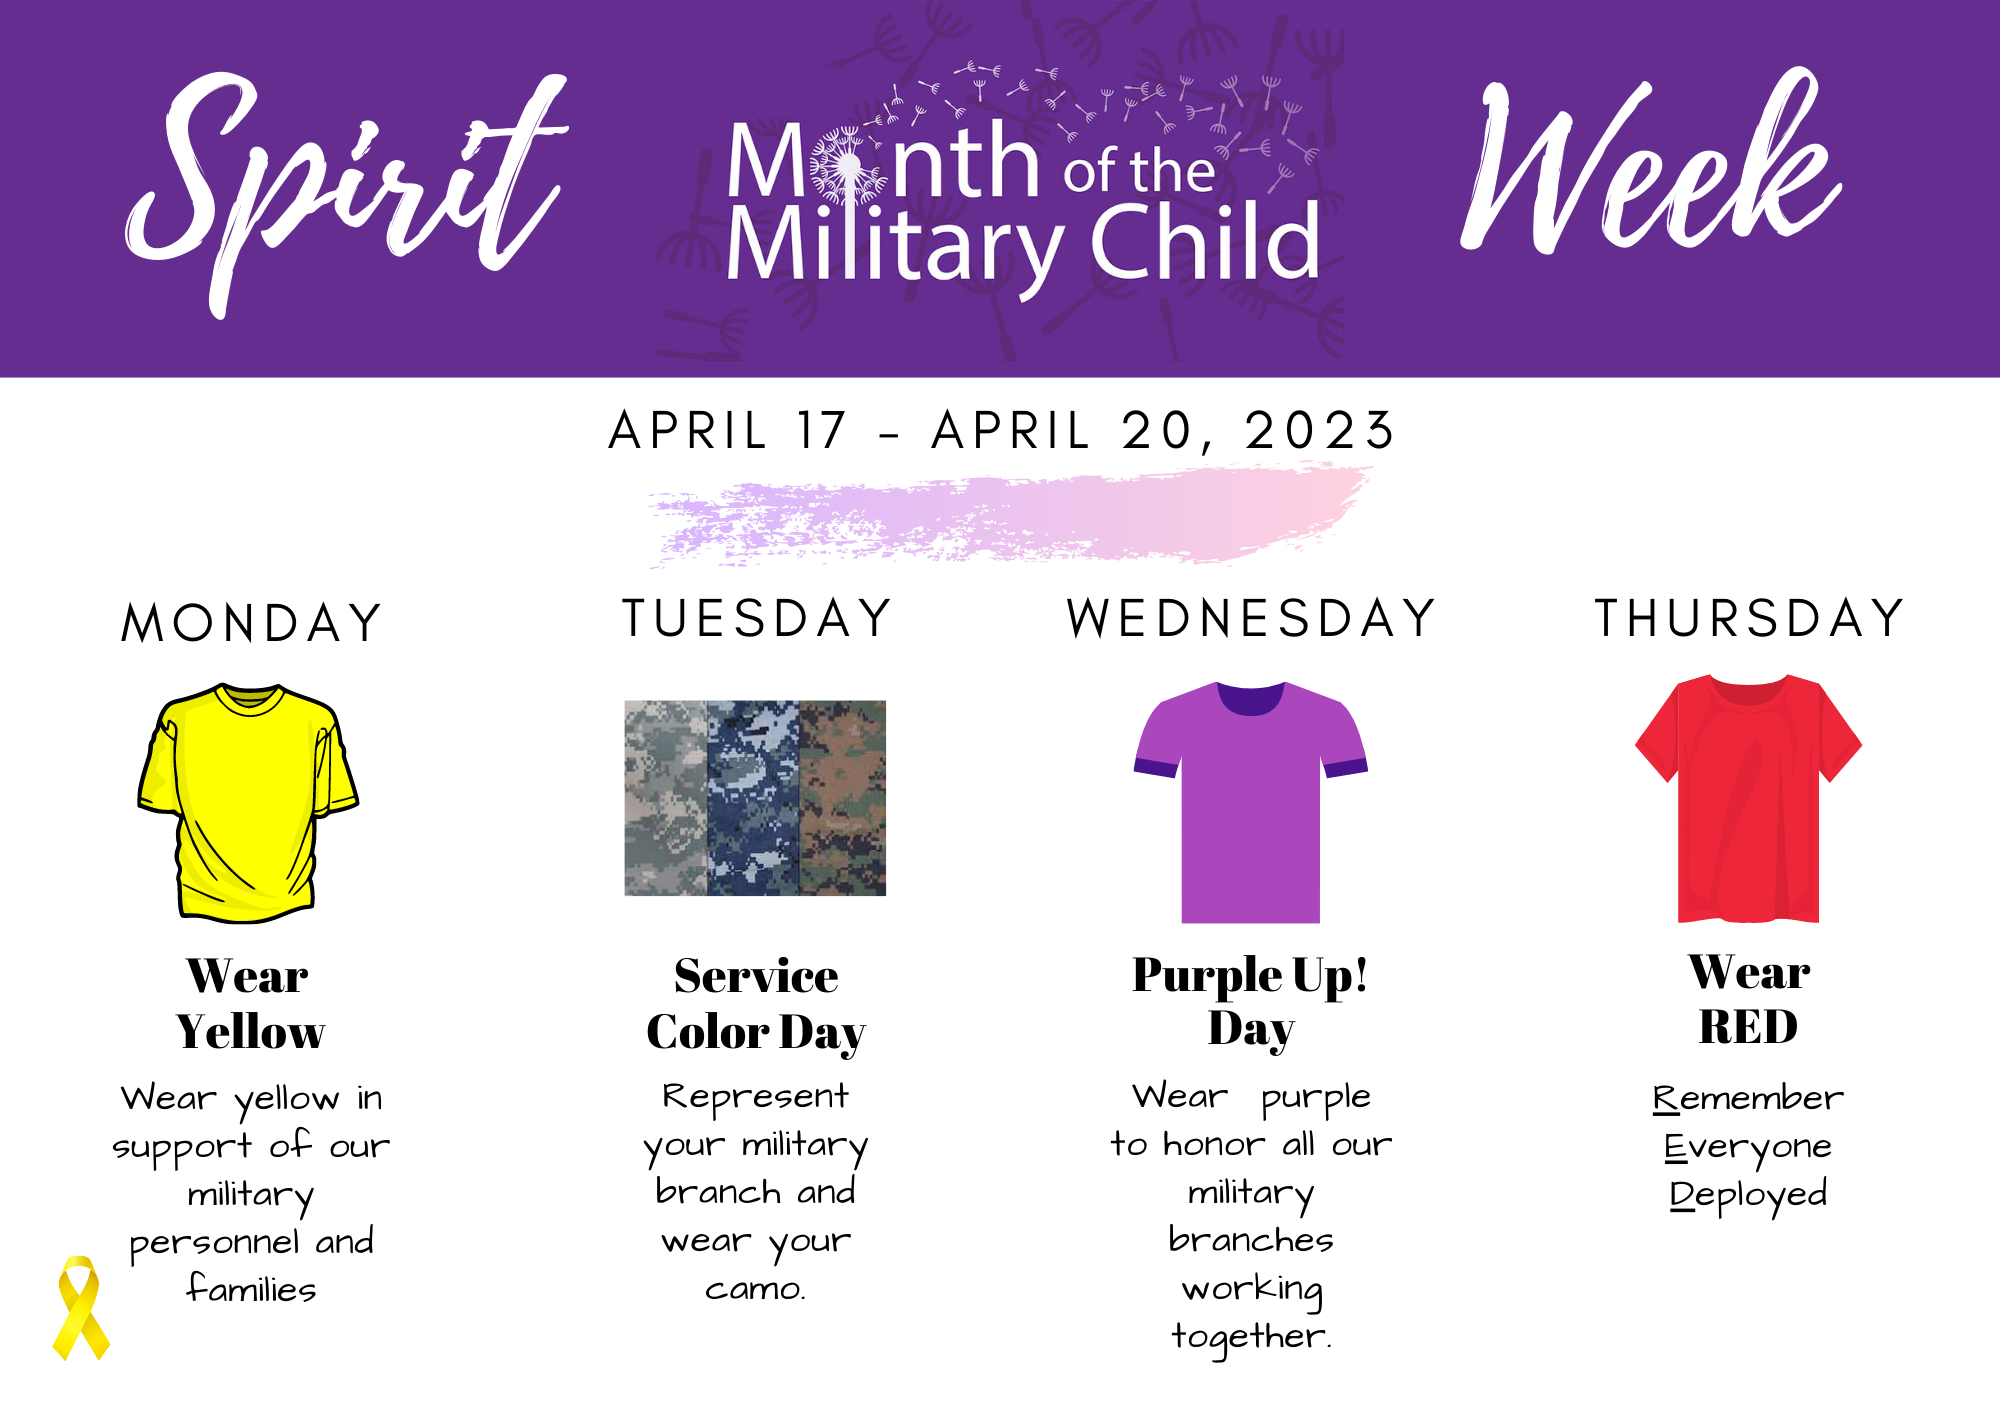 image showing themes for each day of month of military child spirit week